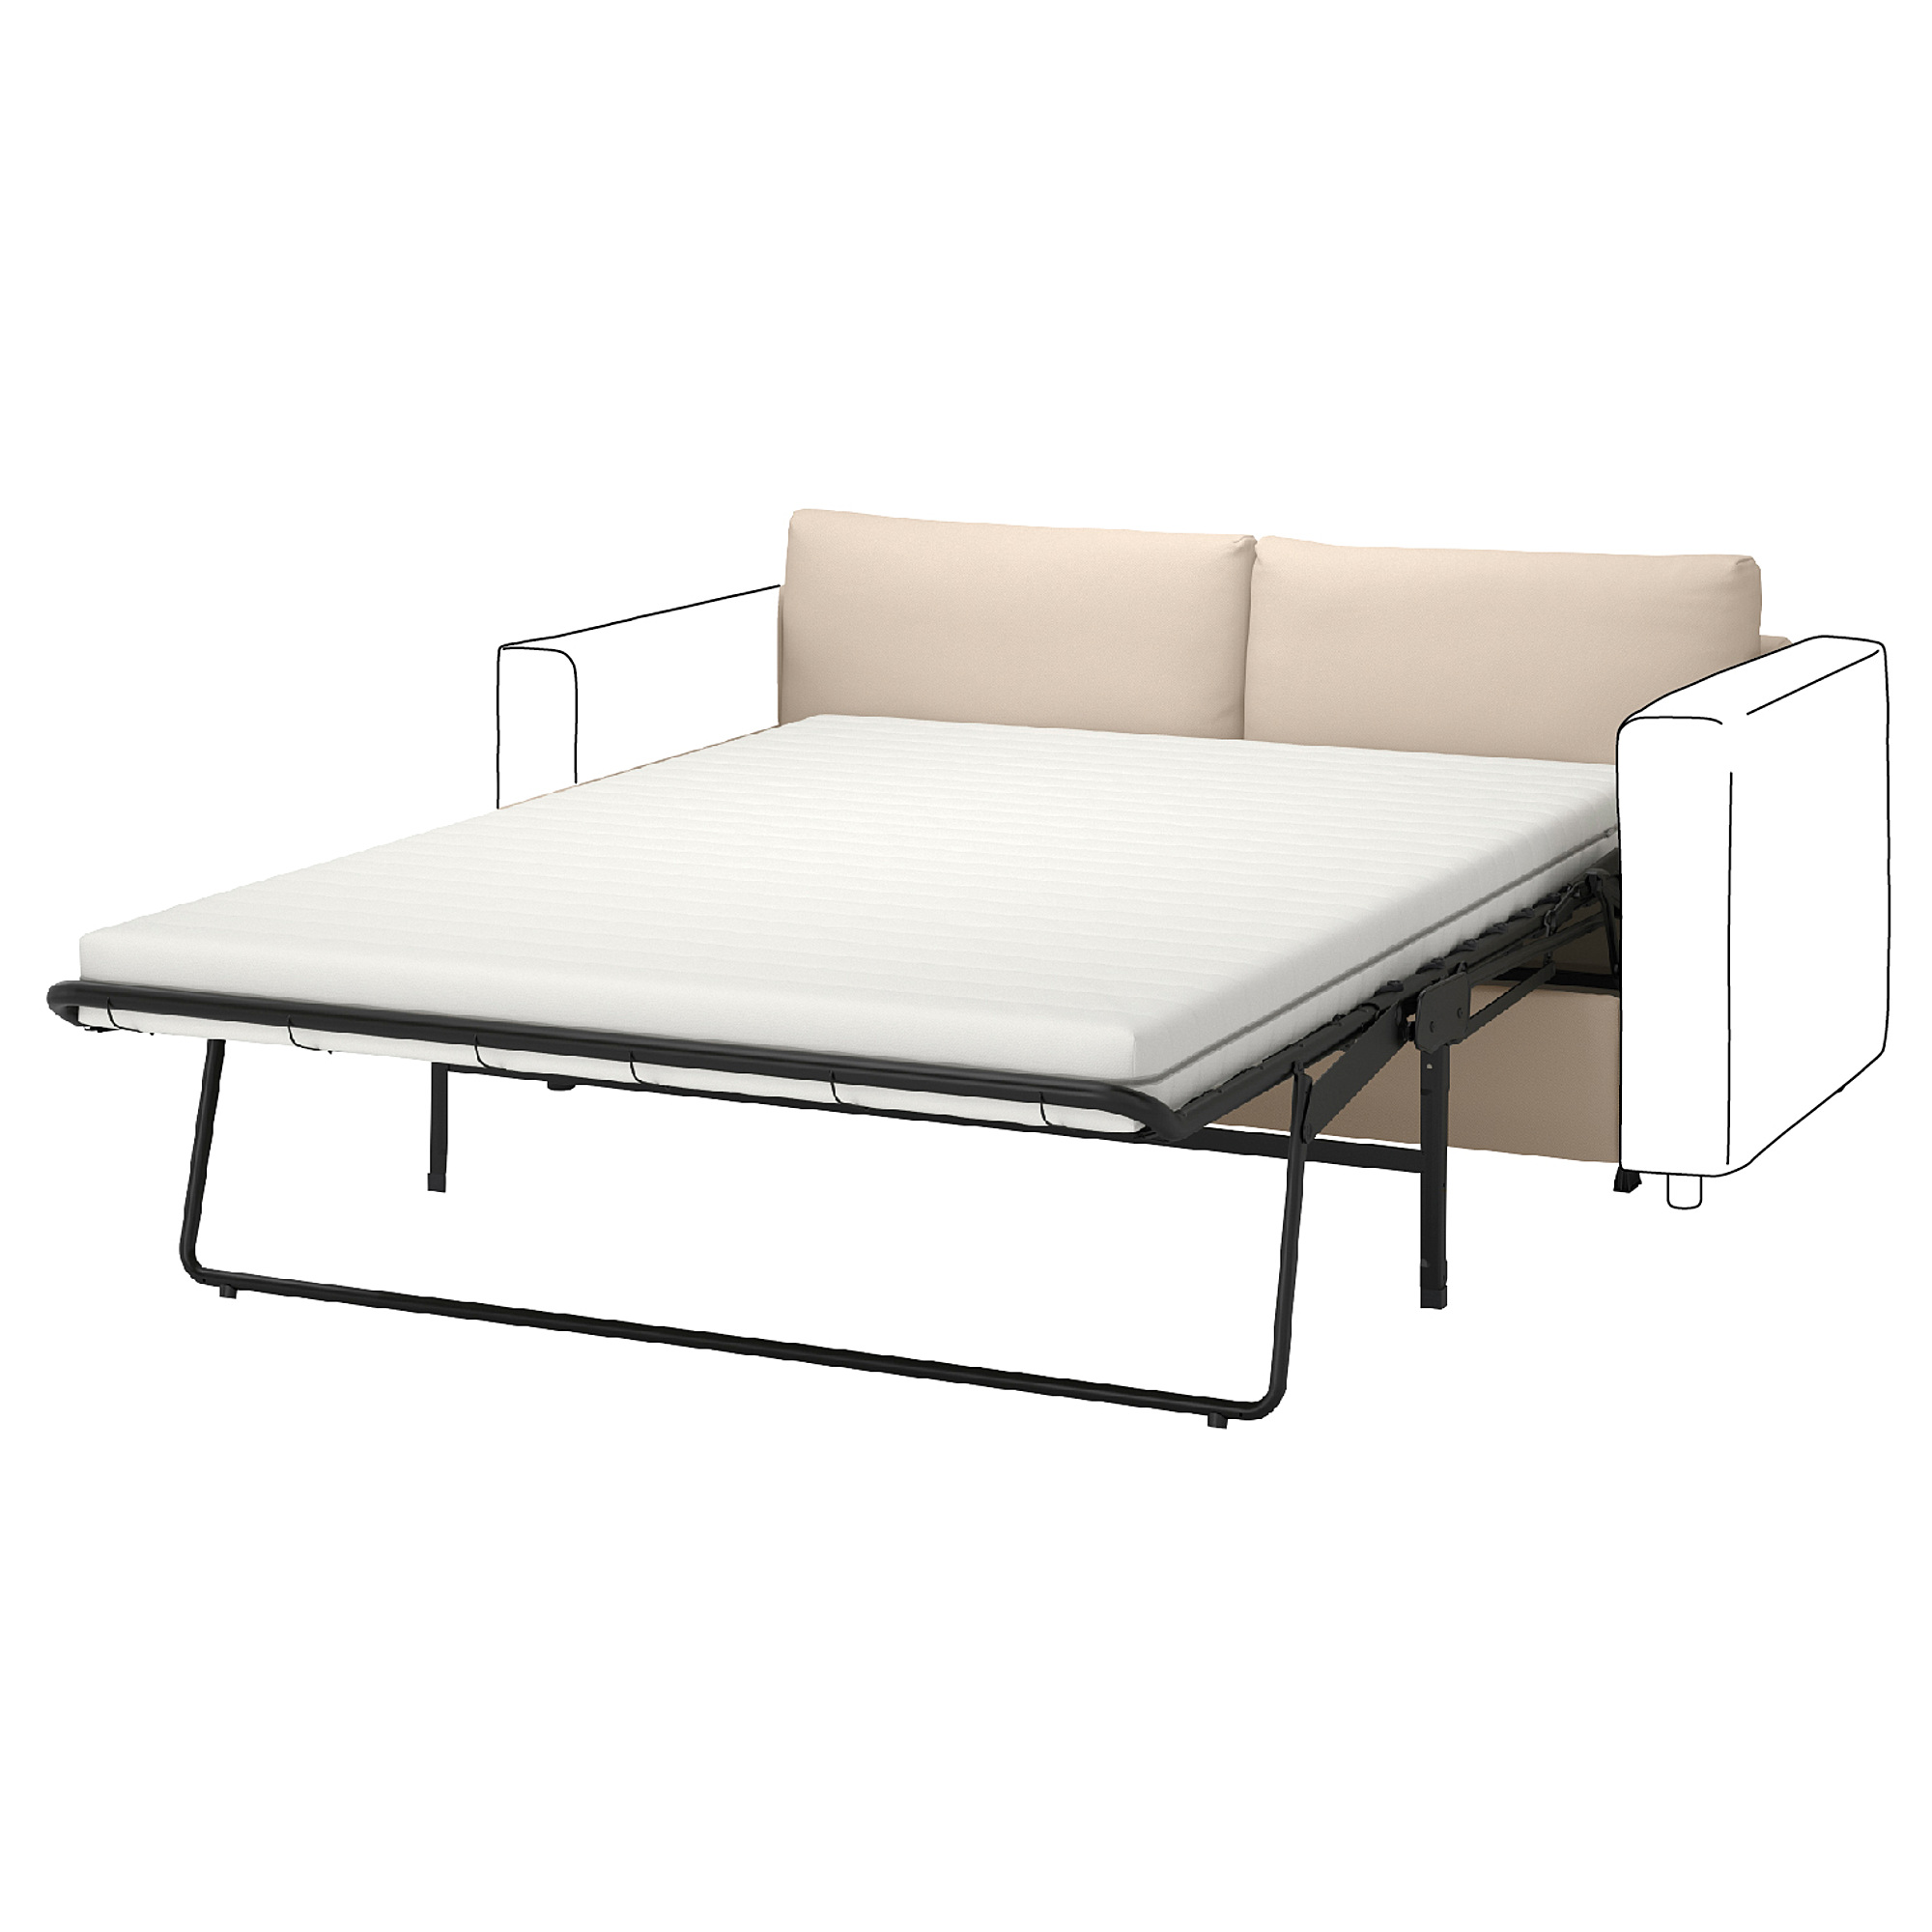 VIMLE cover for 2-seat sofa-bed section